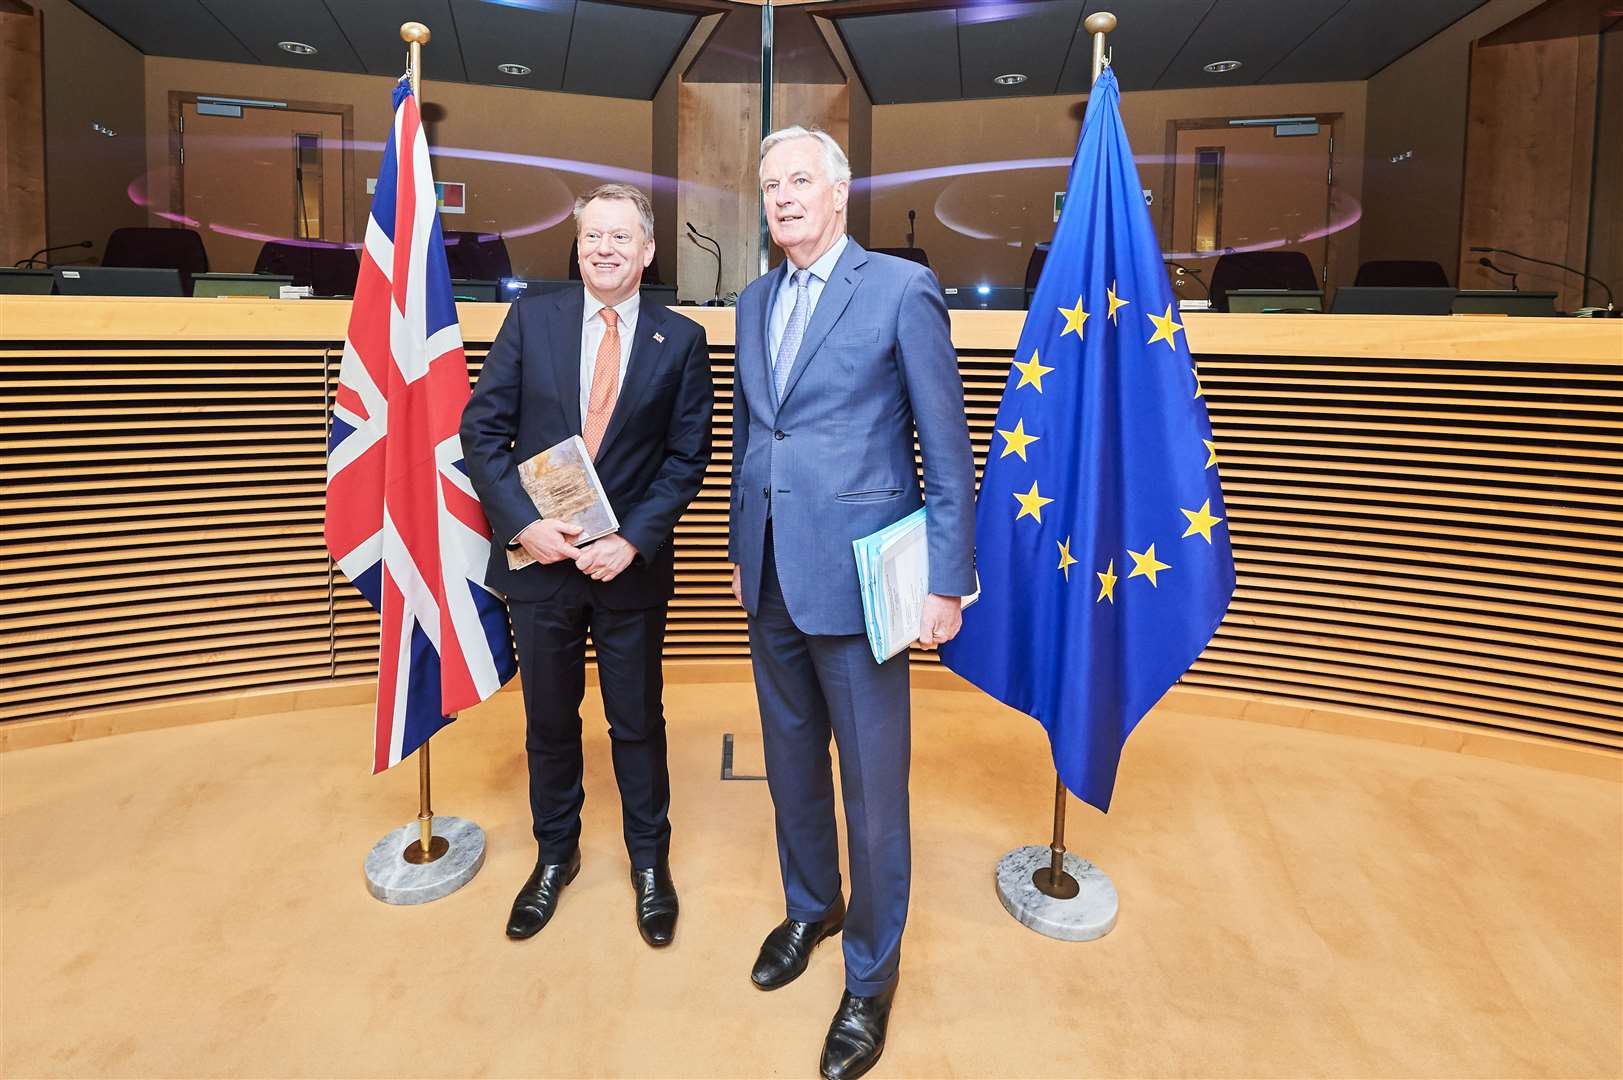 Both the UK and EU chief Brexit negotiators tested positive for Covid-19 but are determined to press ahead with post-Brexit talks PA)